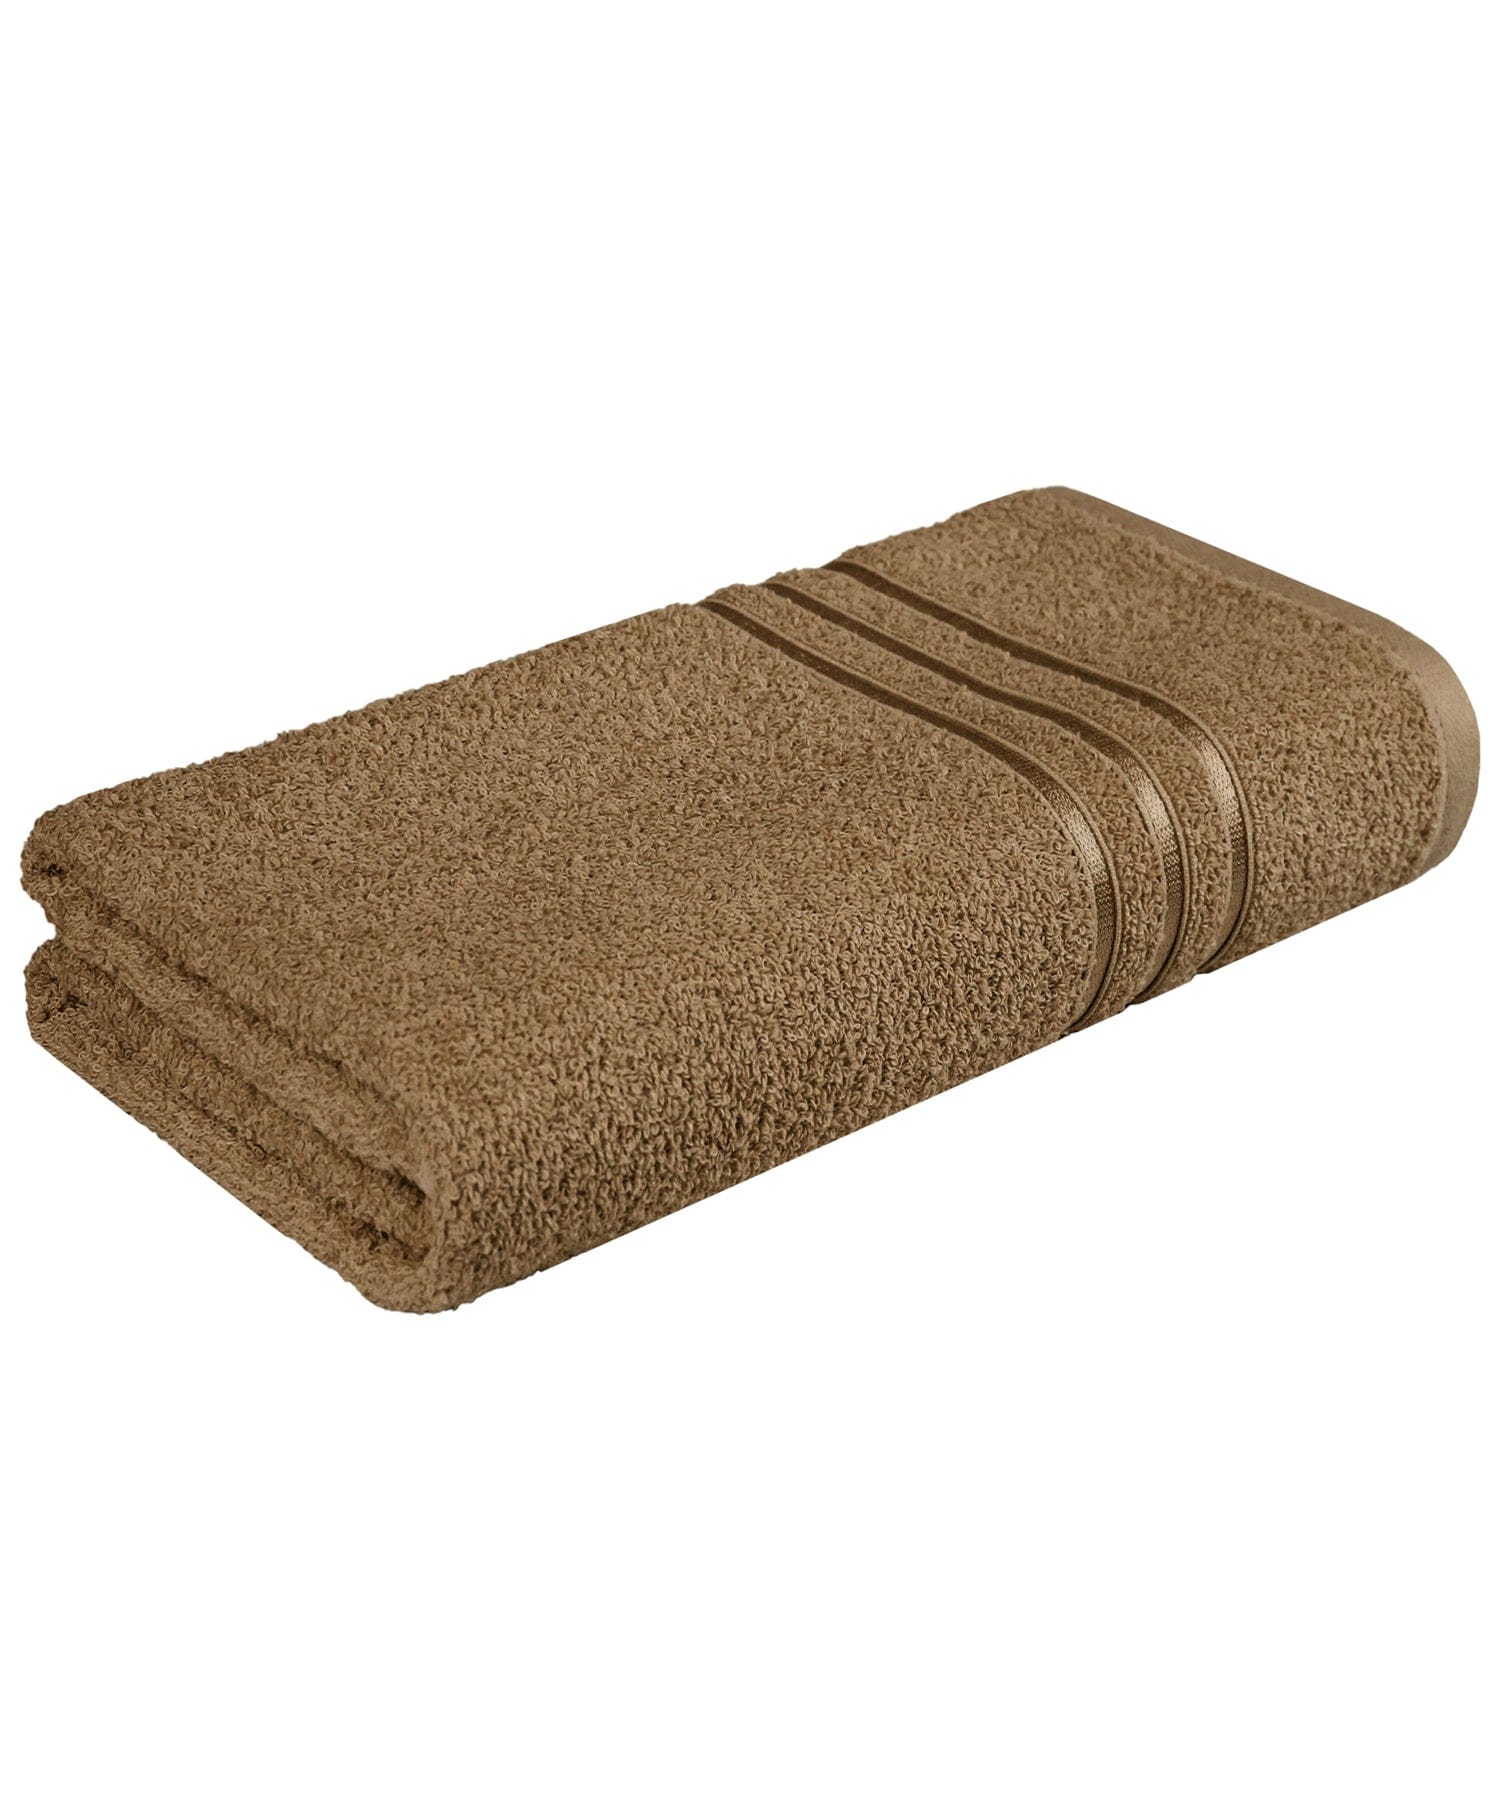 COMFORT LIVING TOWELS,100% Cotton,Quicky Dry,Light Weight, COCONUT SHELL